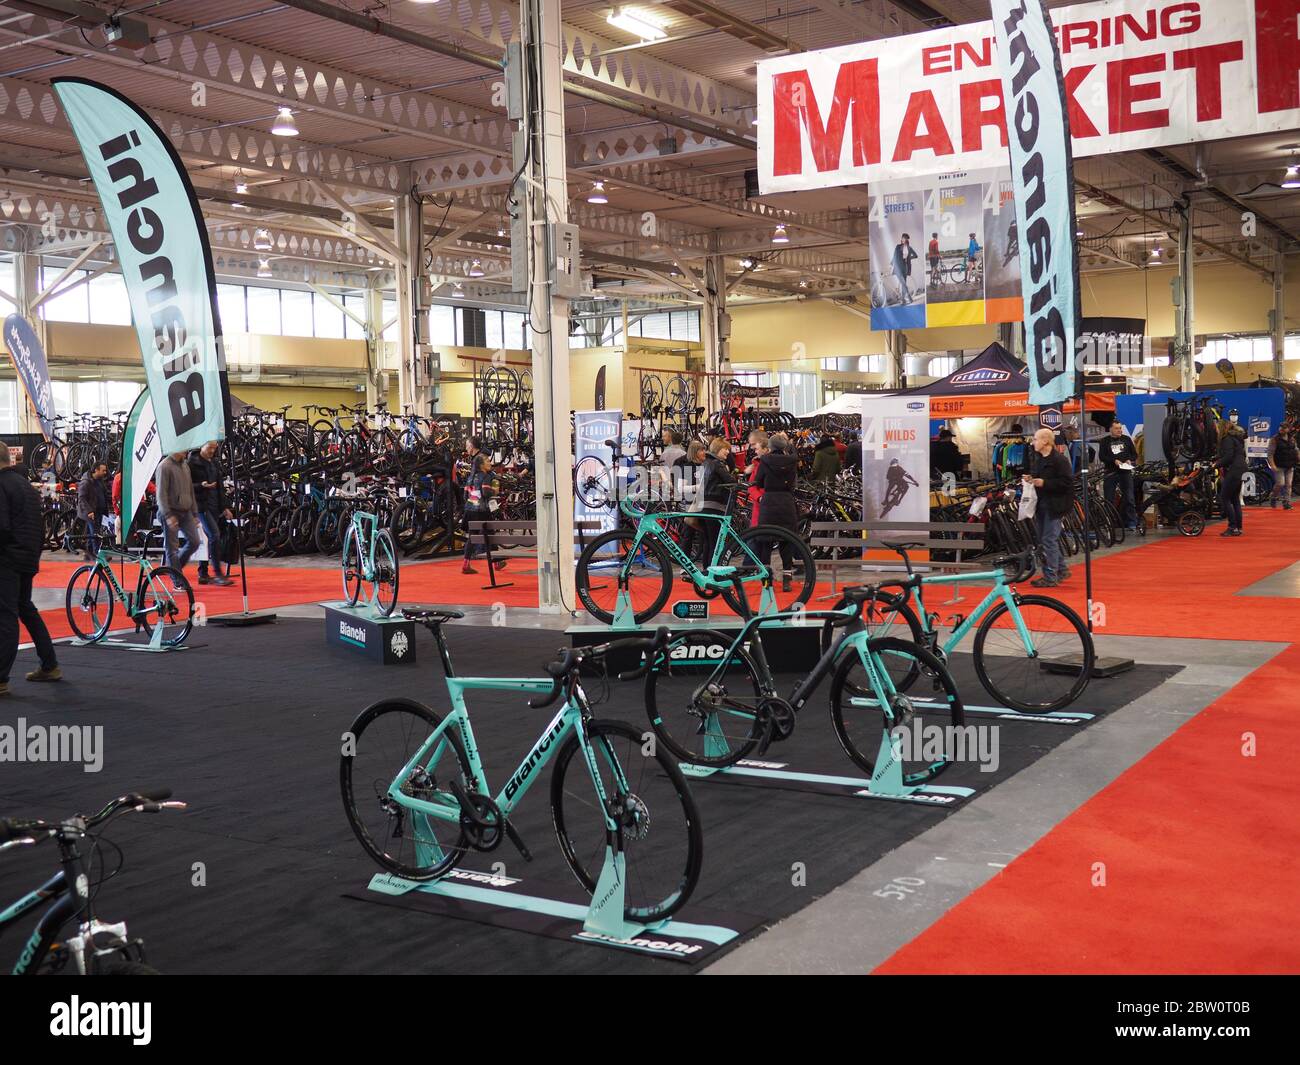 TORONTO - Cycling is an increasingly popular form of exercise and the annual bicycle show offering high end bikes attract large crowds. Stock Photo